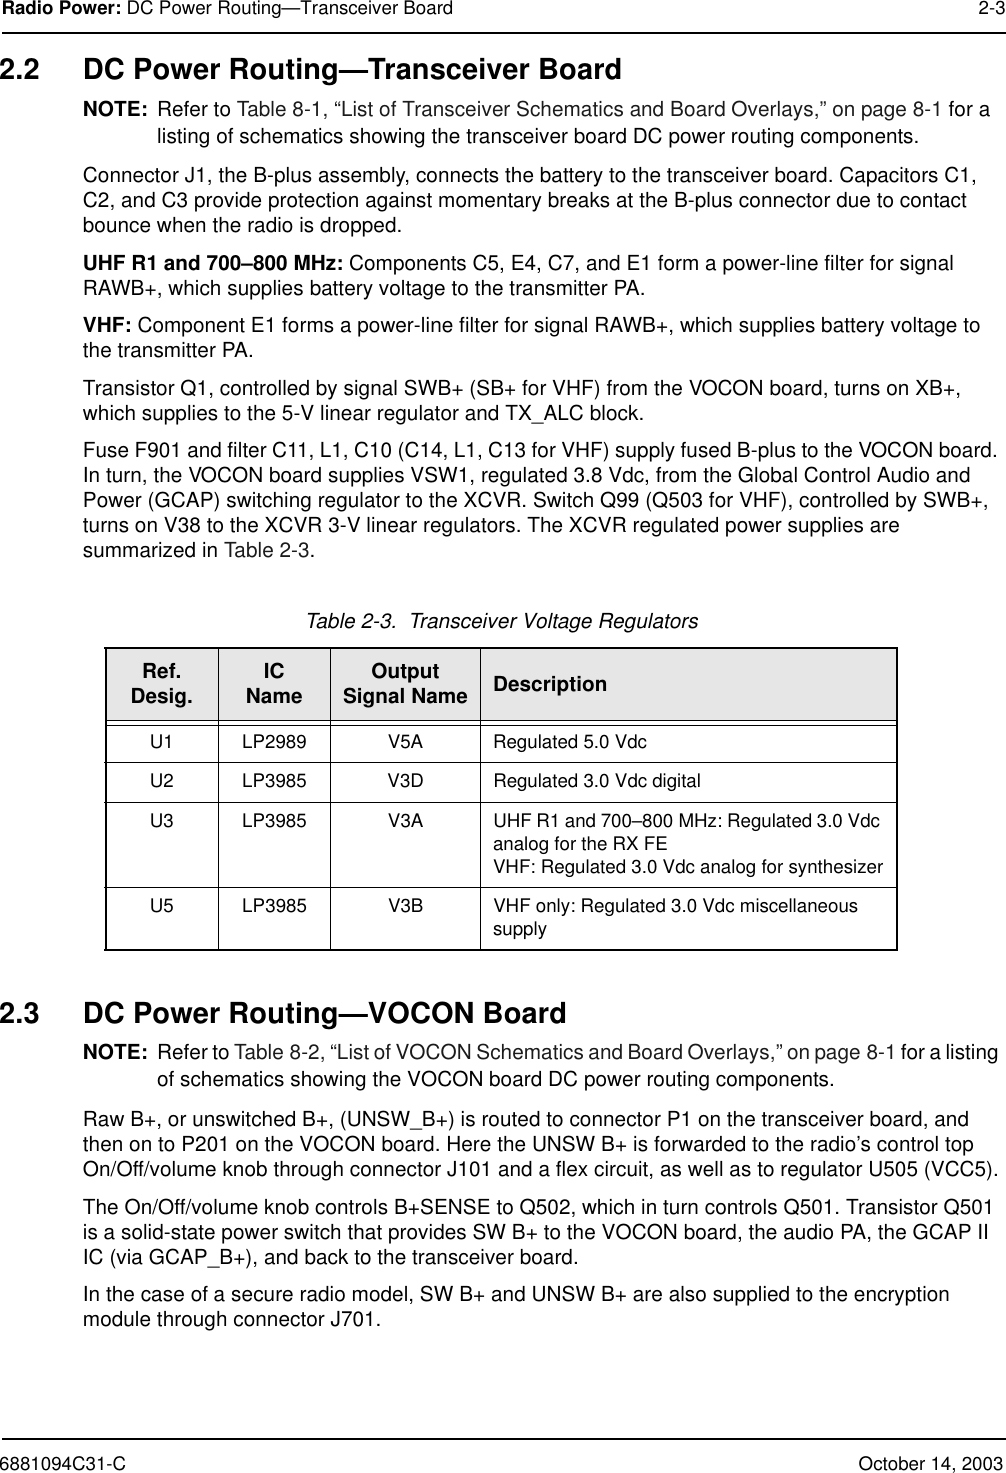 6881094C31-C October 14, 2003Radio Power: DC Power Routing—Transceiver Board 2-32.2 DC Power Routing—Transceiver BoardNOTE: Refer to Table 8-1, “List of Transceiver Schematics and Board Overlays,” on page 8-1 for a listing of schematics showing the transceiver board DC power routing components.Connector J1, the B-plus assembly, connects the battery to the transceiver board. Capacitors C1, C2, and C3 provide protection against momentary breaks at the B-plus connector due to contact bounce when the radio is dropped.UHF R1 and 700–800 MHz: Components C5, E4, C7, and E1 form a power-line filter for signal RAWB+, which supplies battery voltage to the transmitter PA.VHF: Component E1 forms a power-line filter for signal RAWB+, which supplies battery voltage to the transmitter PA.Transistor Q1, controlled by signal SWB+ (SB+ for VHF) from the VOCON board, turns on XB+, which supplies to the 5-V linear regulator and TX_ALC block.Fuse F901 and filter C11, L1, C10 (C14, L1, C13 for VHF) supply fused B-plus to the VOCON board. In turn, the VOCON board supplies VSW1, regulated 3.8 Vdc, from the Global Control Audio and Power (GCAP) switching regulator to the XCVR. Switch Q99 (Q503 for VHF), controlled by SWB+, turns on V38 to the XCVR 3-V linear regulators. The XCVR regulated power supplies are summarized in Table 2-3.2.3 DC Power Routing—VOCON BoardNOTE: Refer to Table 8-2, “List of VOCON Schematics and Board Overlays,” on page 8-1 for a listing of schematics showing the VOCON board DC power routing components.Raw B+, or unswitched B+, (UNSW_B+) is routed to connector P1 on the transceiver board, and then on to P201 on the VOCON board. Here the UNSW B+ is forwarded to the radio’s control topOn/Off/volume knob through connector J101 and a flex circuit, as well as to regulator U505 (VCC5).The On/Off/volume knob controls B+SENSE to Q502, which in turn controls Q501. Transistor Q501 is a solid-state power switch that provides SW B+ to the VOCON board, the audio PA, the GCAP II IC (via GCAP_B+), and back to the transceiver board.In the case of a secure radio model, SW B+ and UNSW B+ are also supplied to the encryption module through connector J701.Table 2-3.  Transceiver Voltage RegulatorsRef.Desig. ICName Output Signal Name DescriptionU1 LP2989 V5A Regulated 5.0 VdcU2 LP3985 V3D Regulated 3.0 Vdc digitalU3 LP3985 V3A UHF R1 and 700–800 MHz: Regulated 3.0 Vdc analog for the RX FEVHF: Regulated 3.0 Vdc analog for synthesizerU5 LP3985 V3B VHF only: Regulated 3.0 Vdc miscellaneous supply